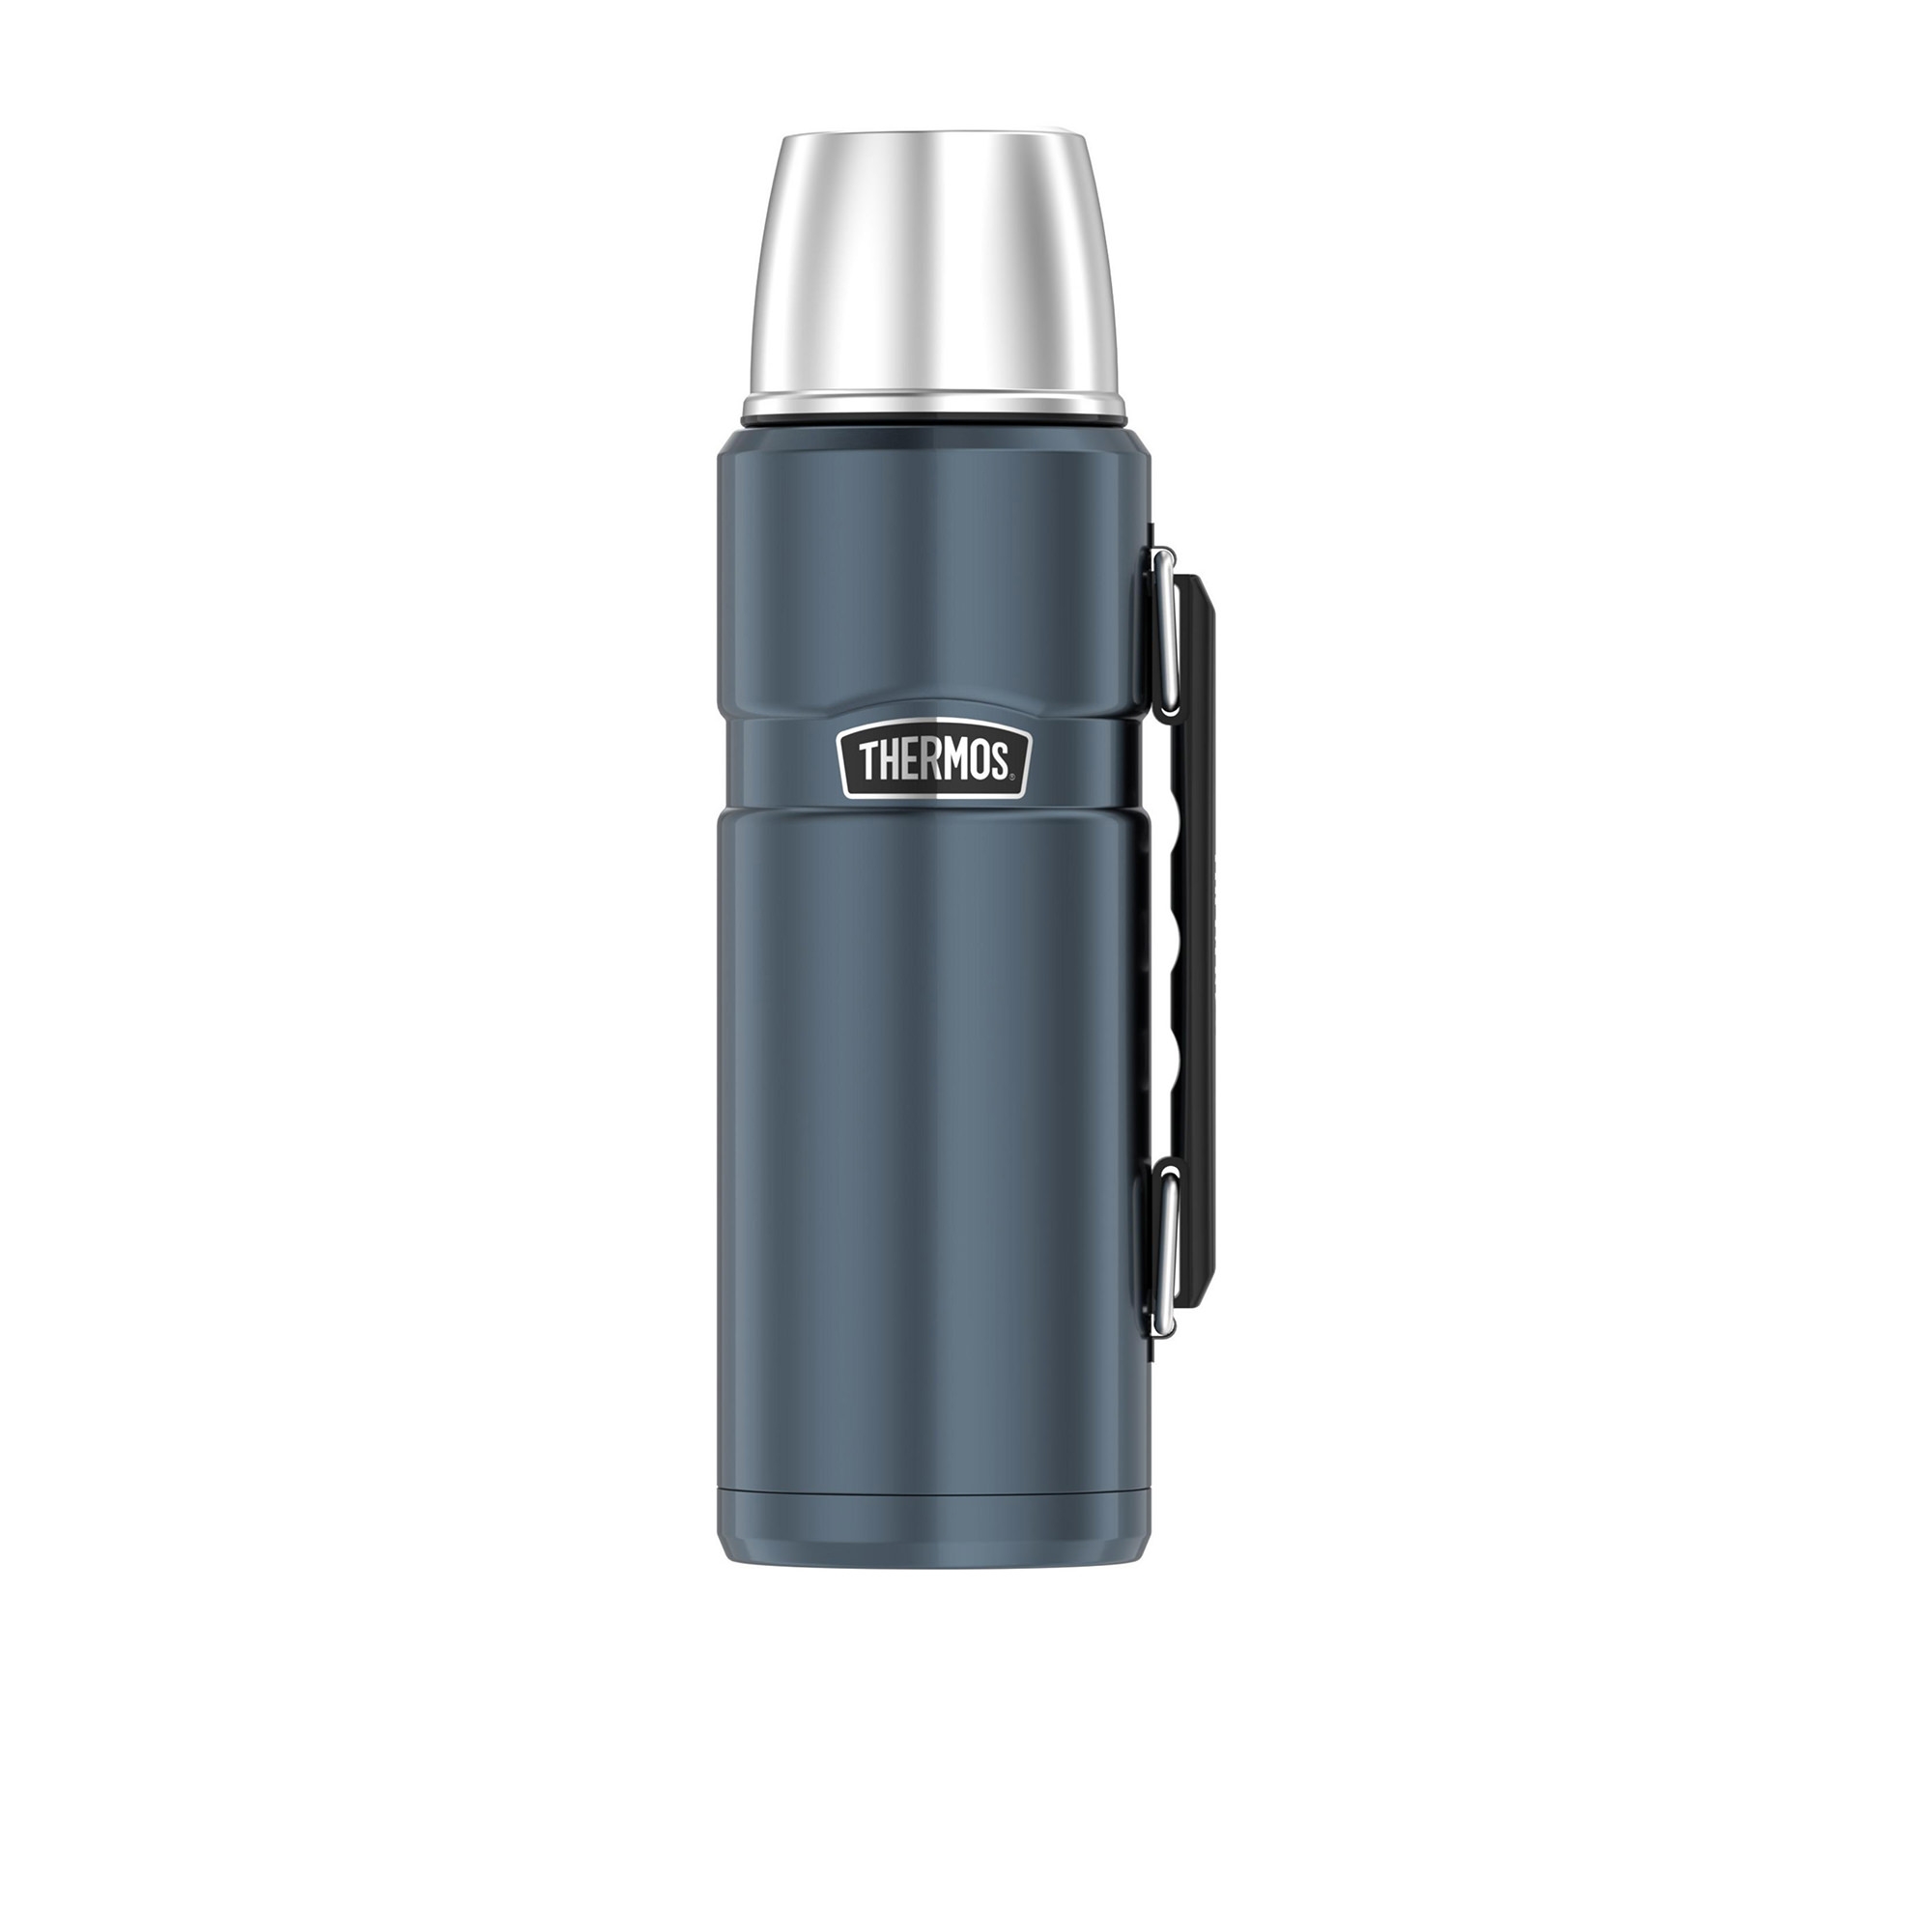 Thermos Stainless King Insulated Flask 1.2L Slate Image 1